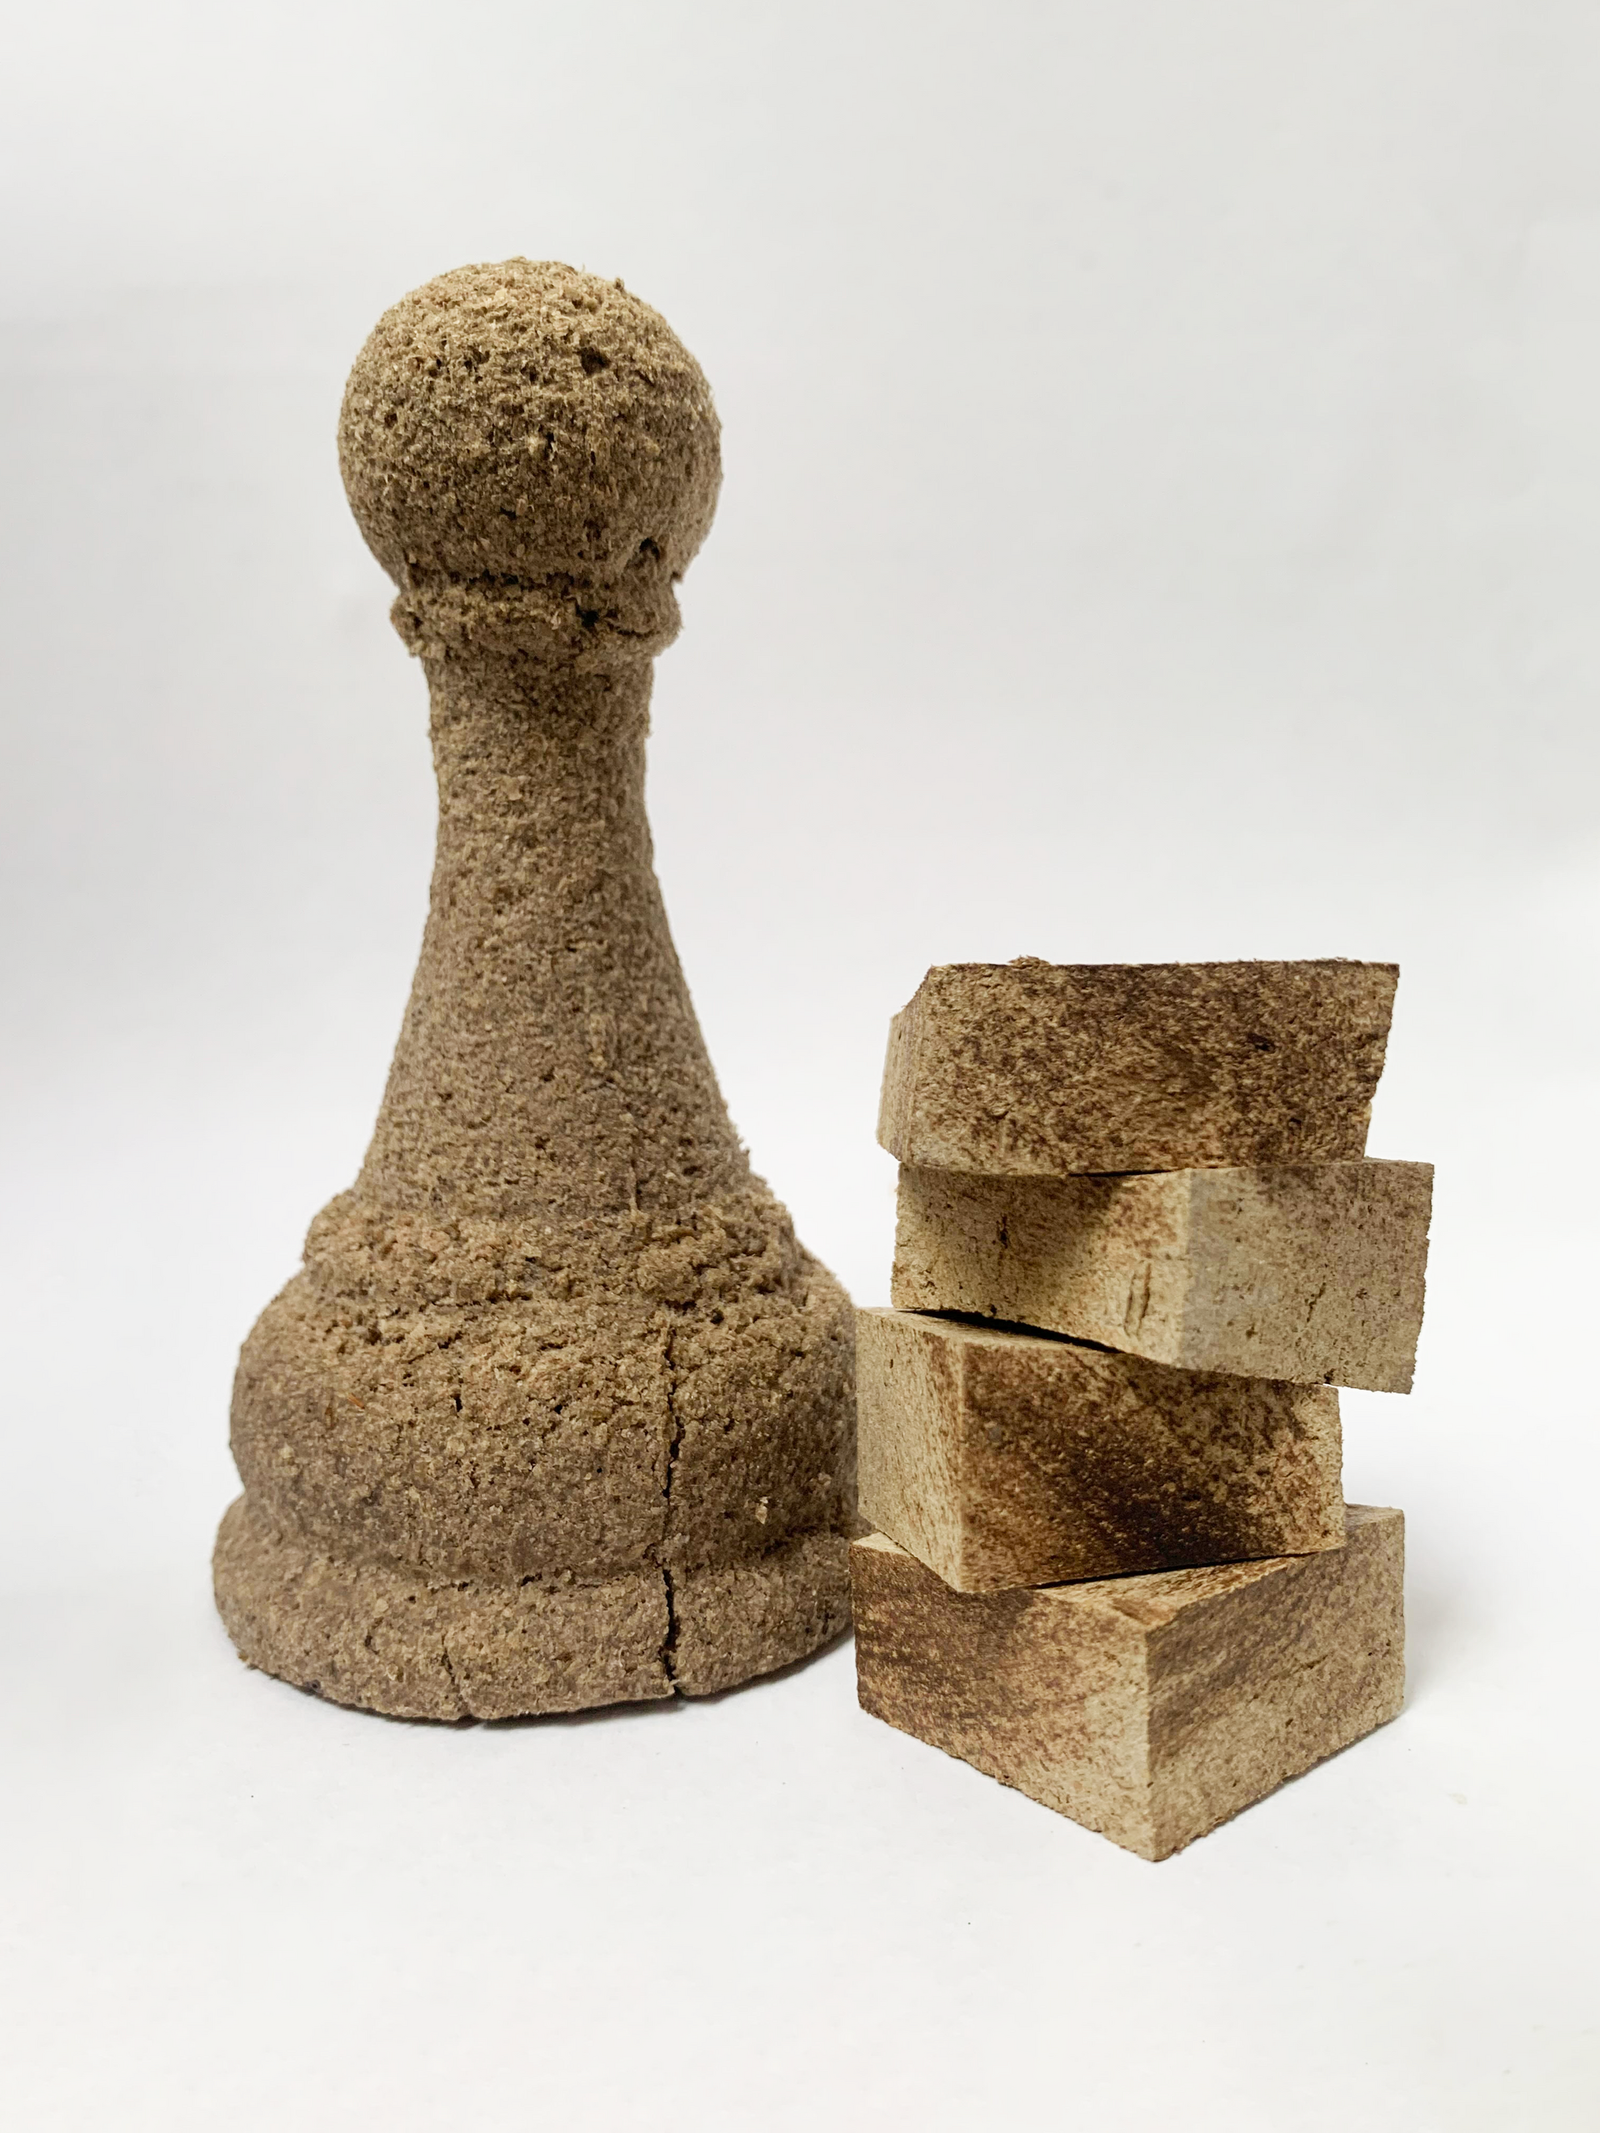 Image of a moulded chess piece using a biomaterial, and cut sections